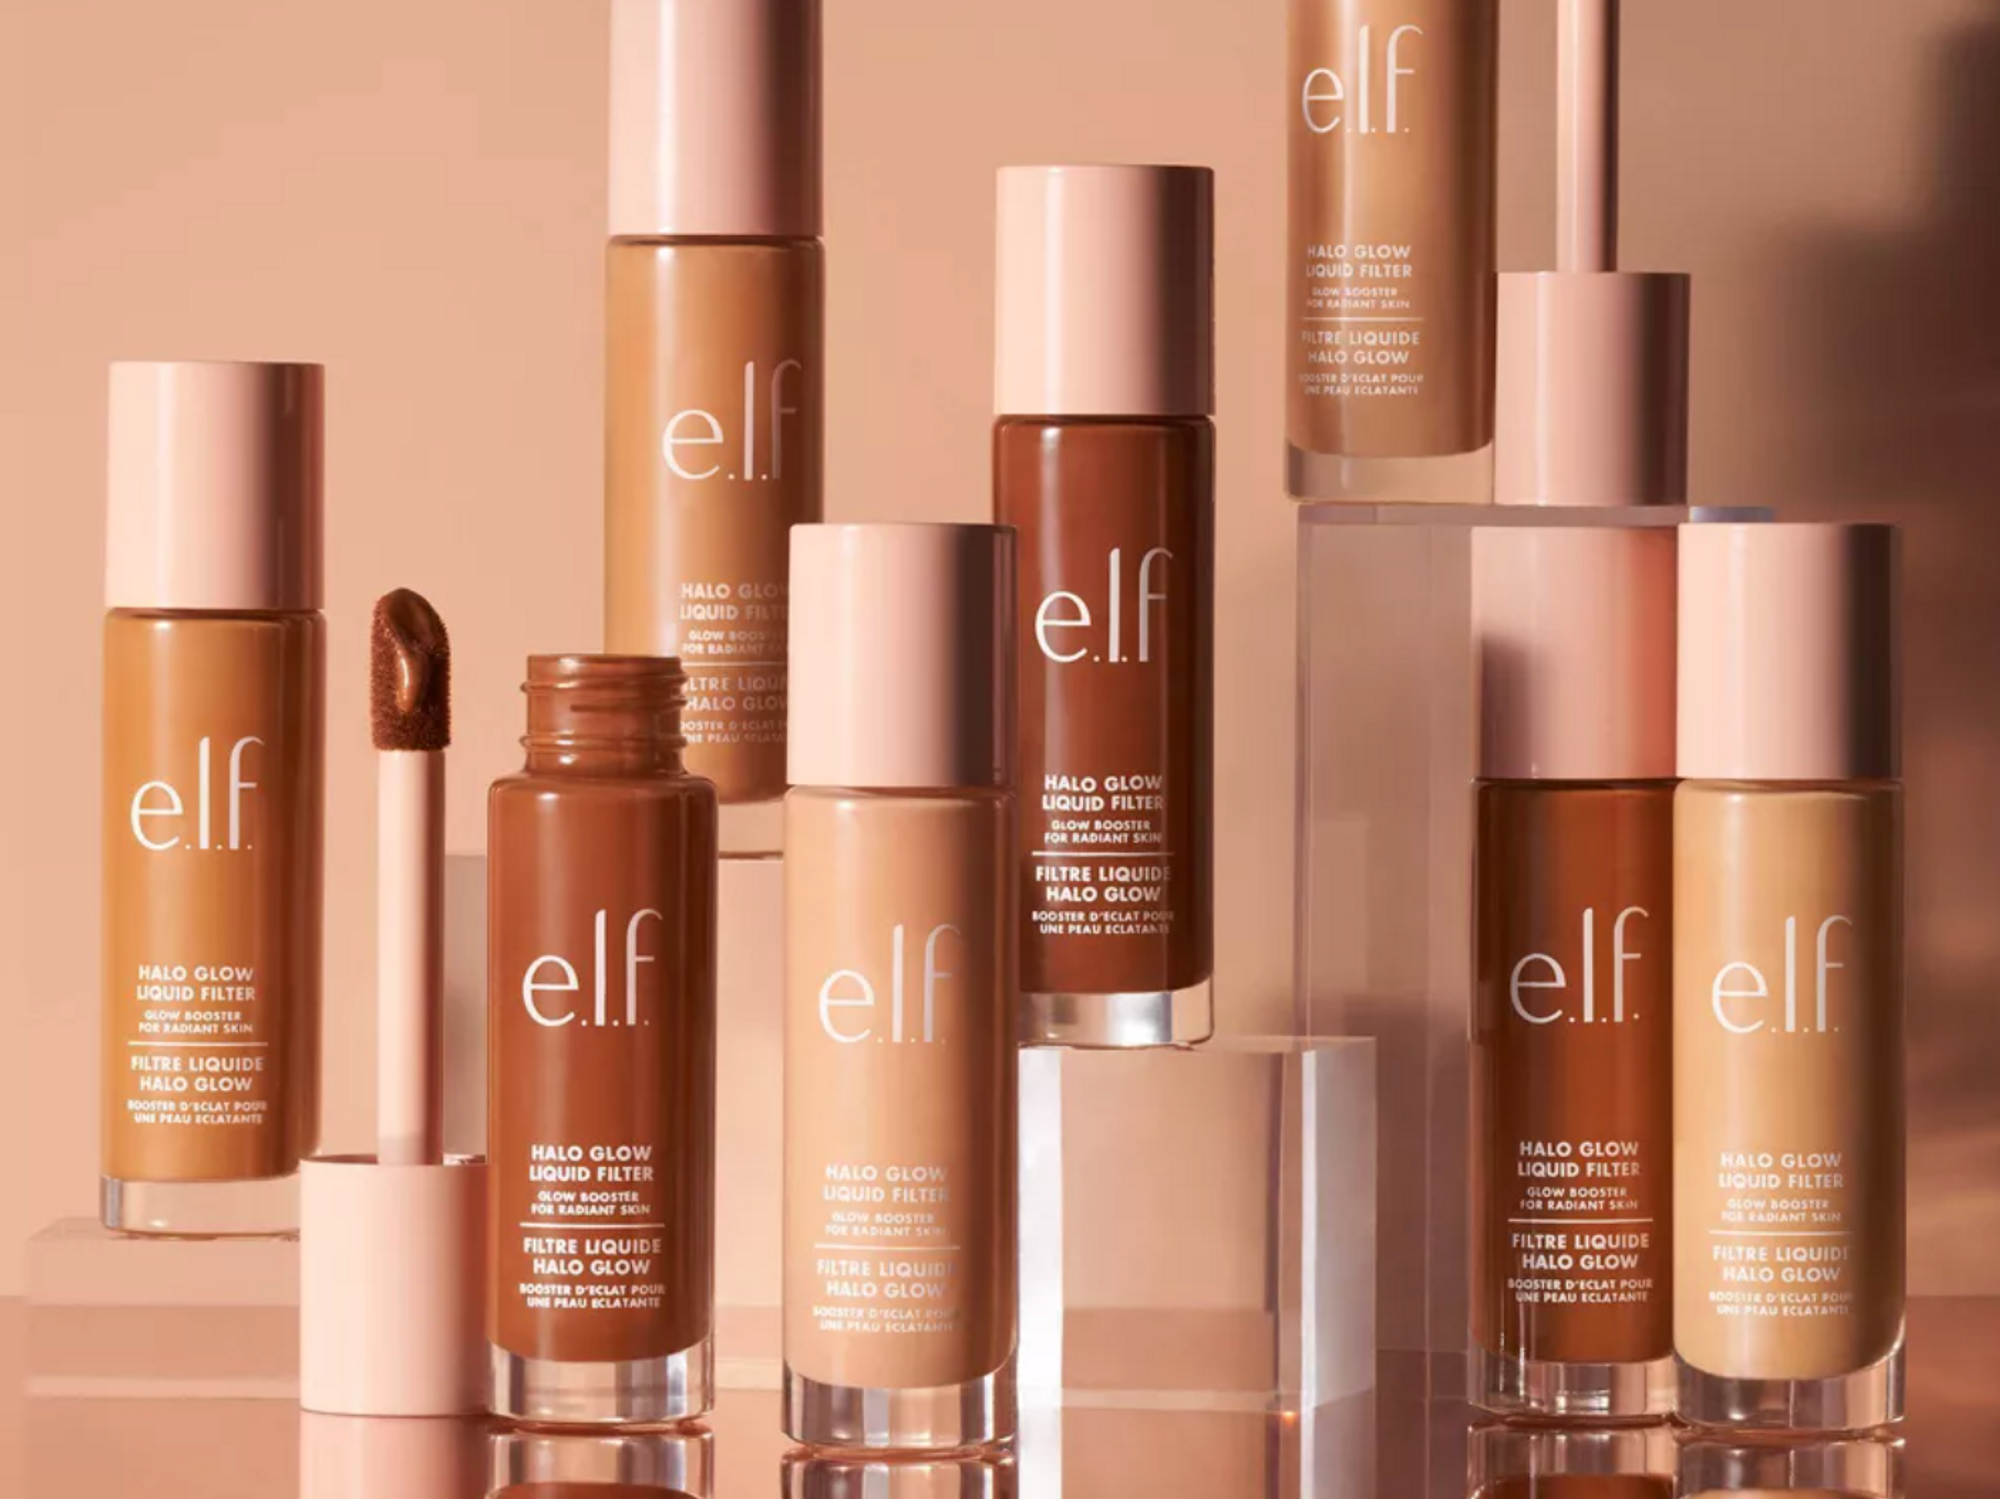 the elf halo glow liquid filter is a dupe for the charlotte tilbury flawless filter